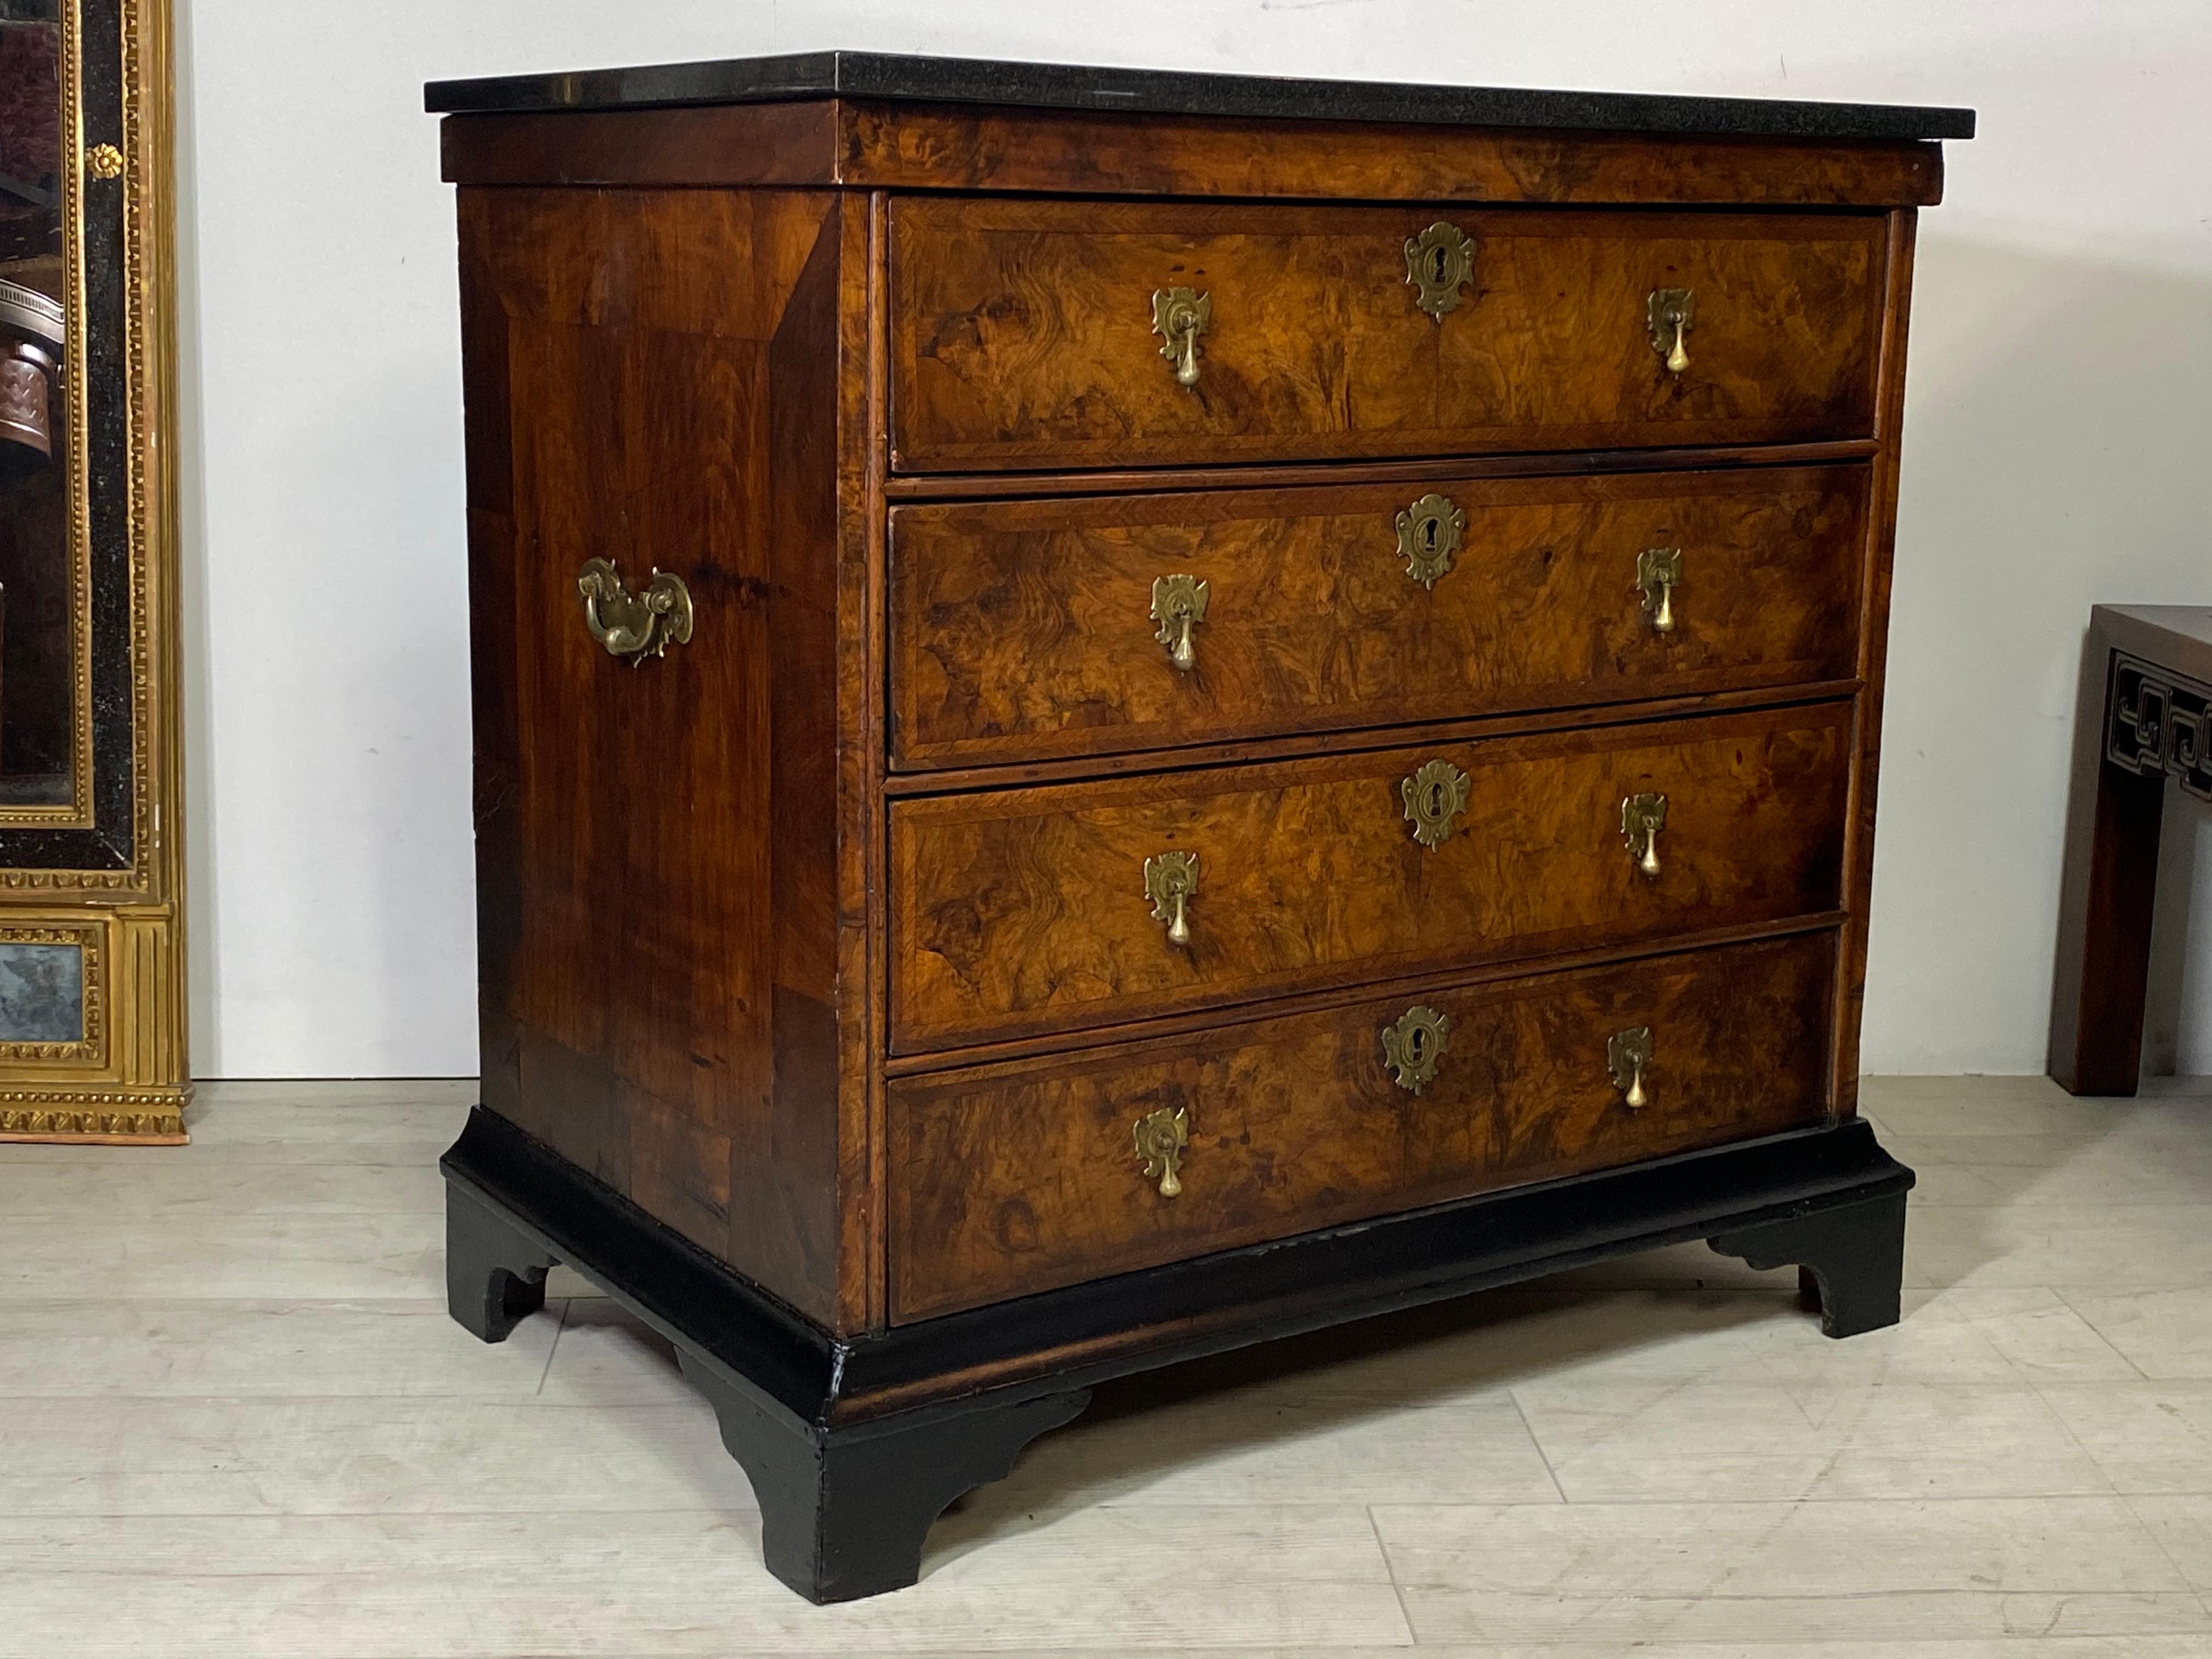 18th century George I English walnut veneered chest of drawers with original brass pulls and brass bale handles on the sides on a repainted black bracket base. New black granite top (was likely marble, originally).